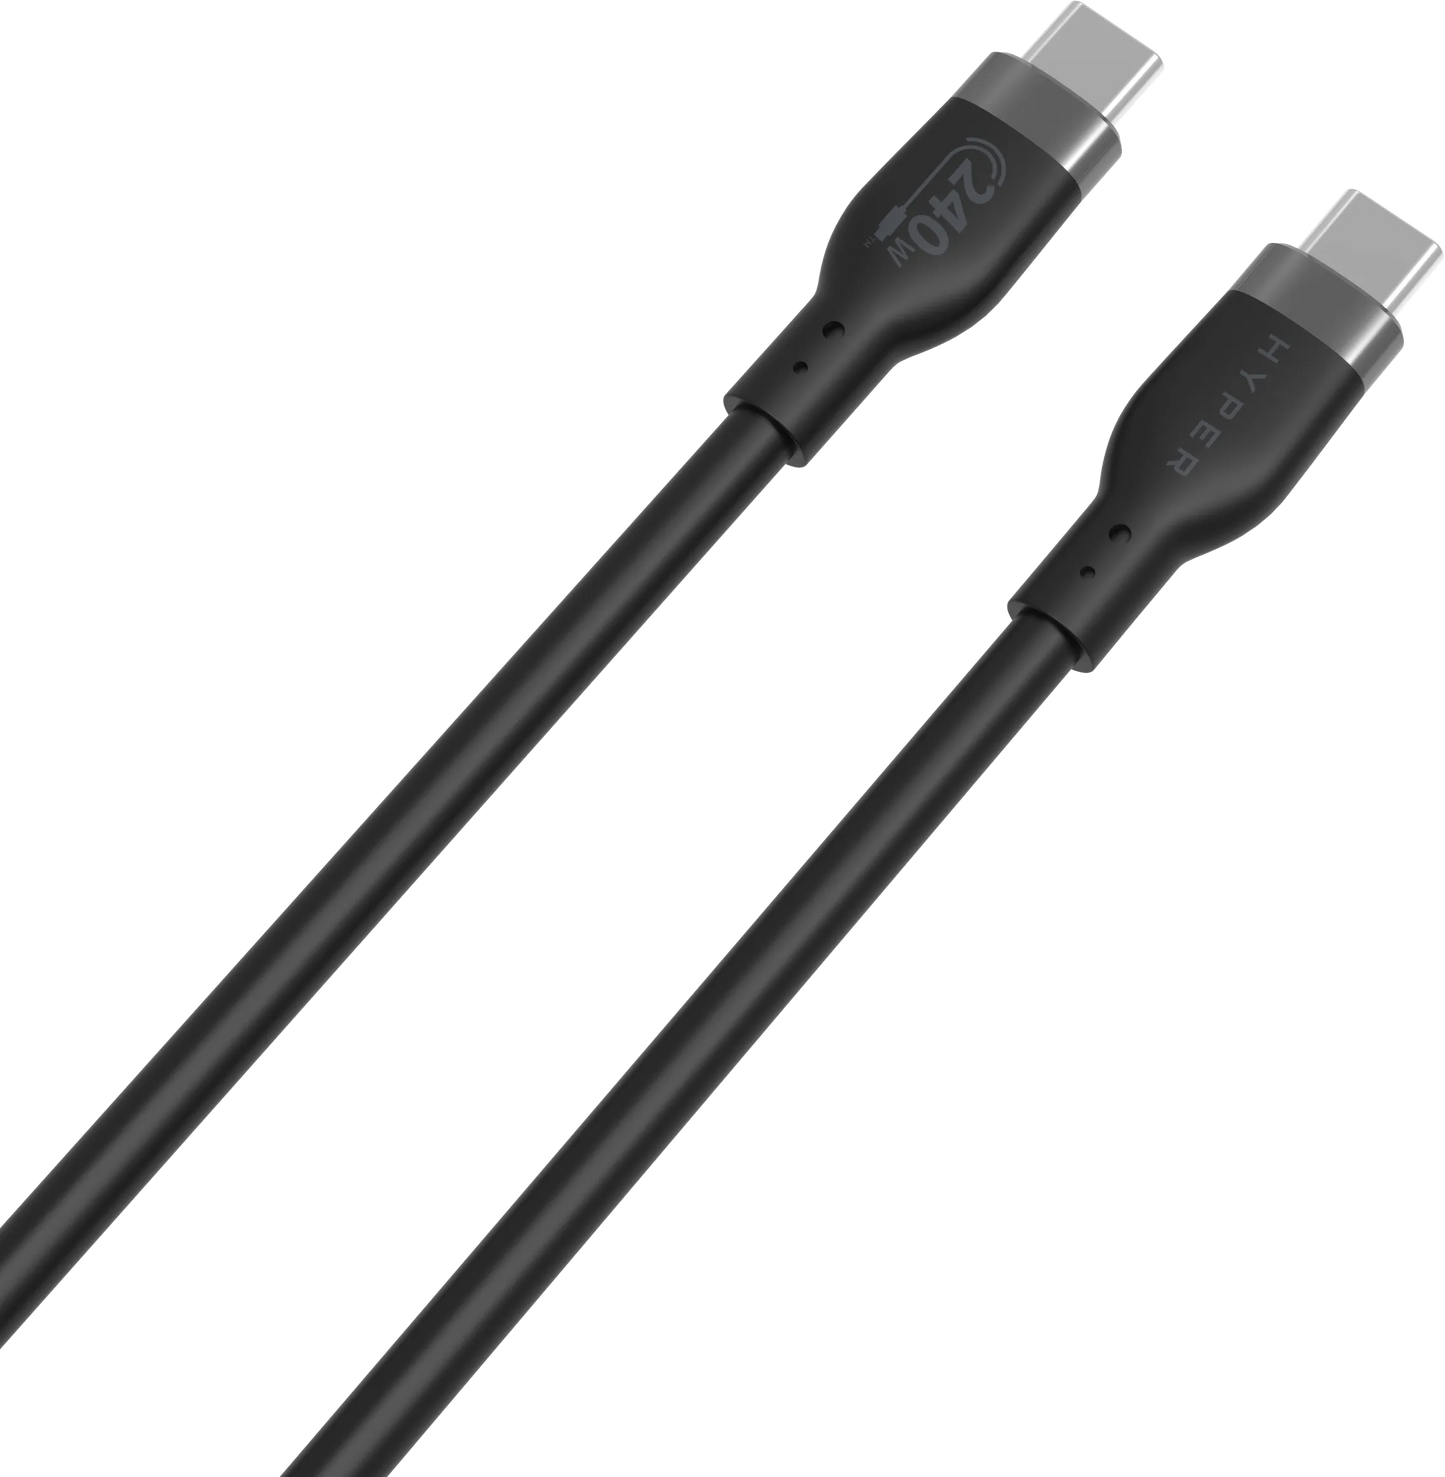 Targus HJ4002BKGL HyperJuice 240W Silicone USB-C to USB-C Cable (6ft/2m), Black, 6941921149536